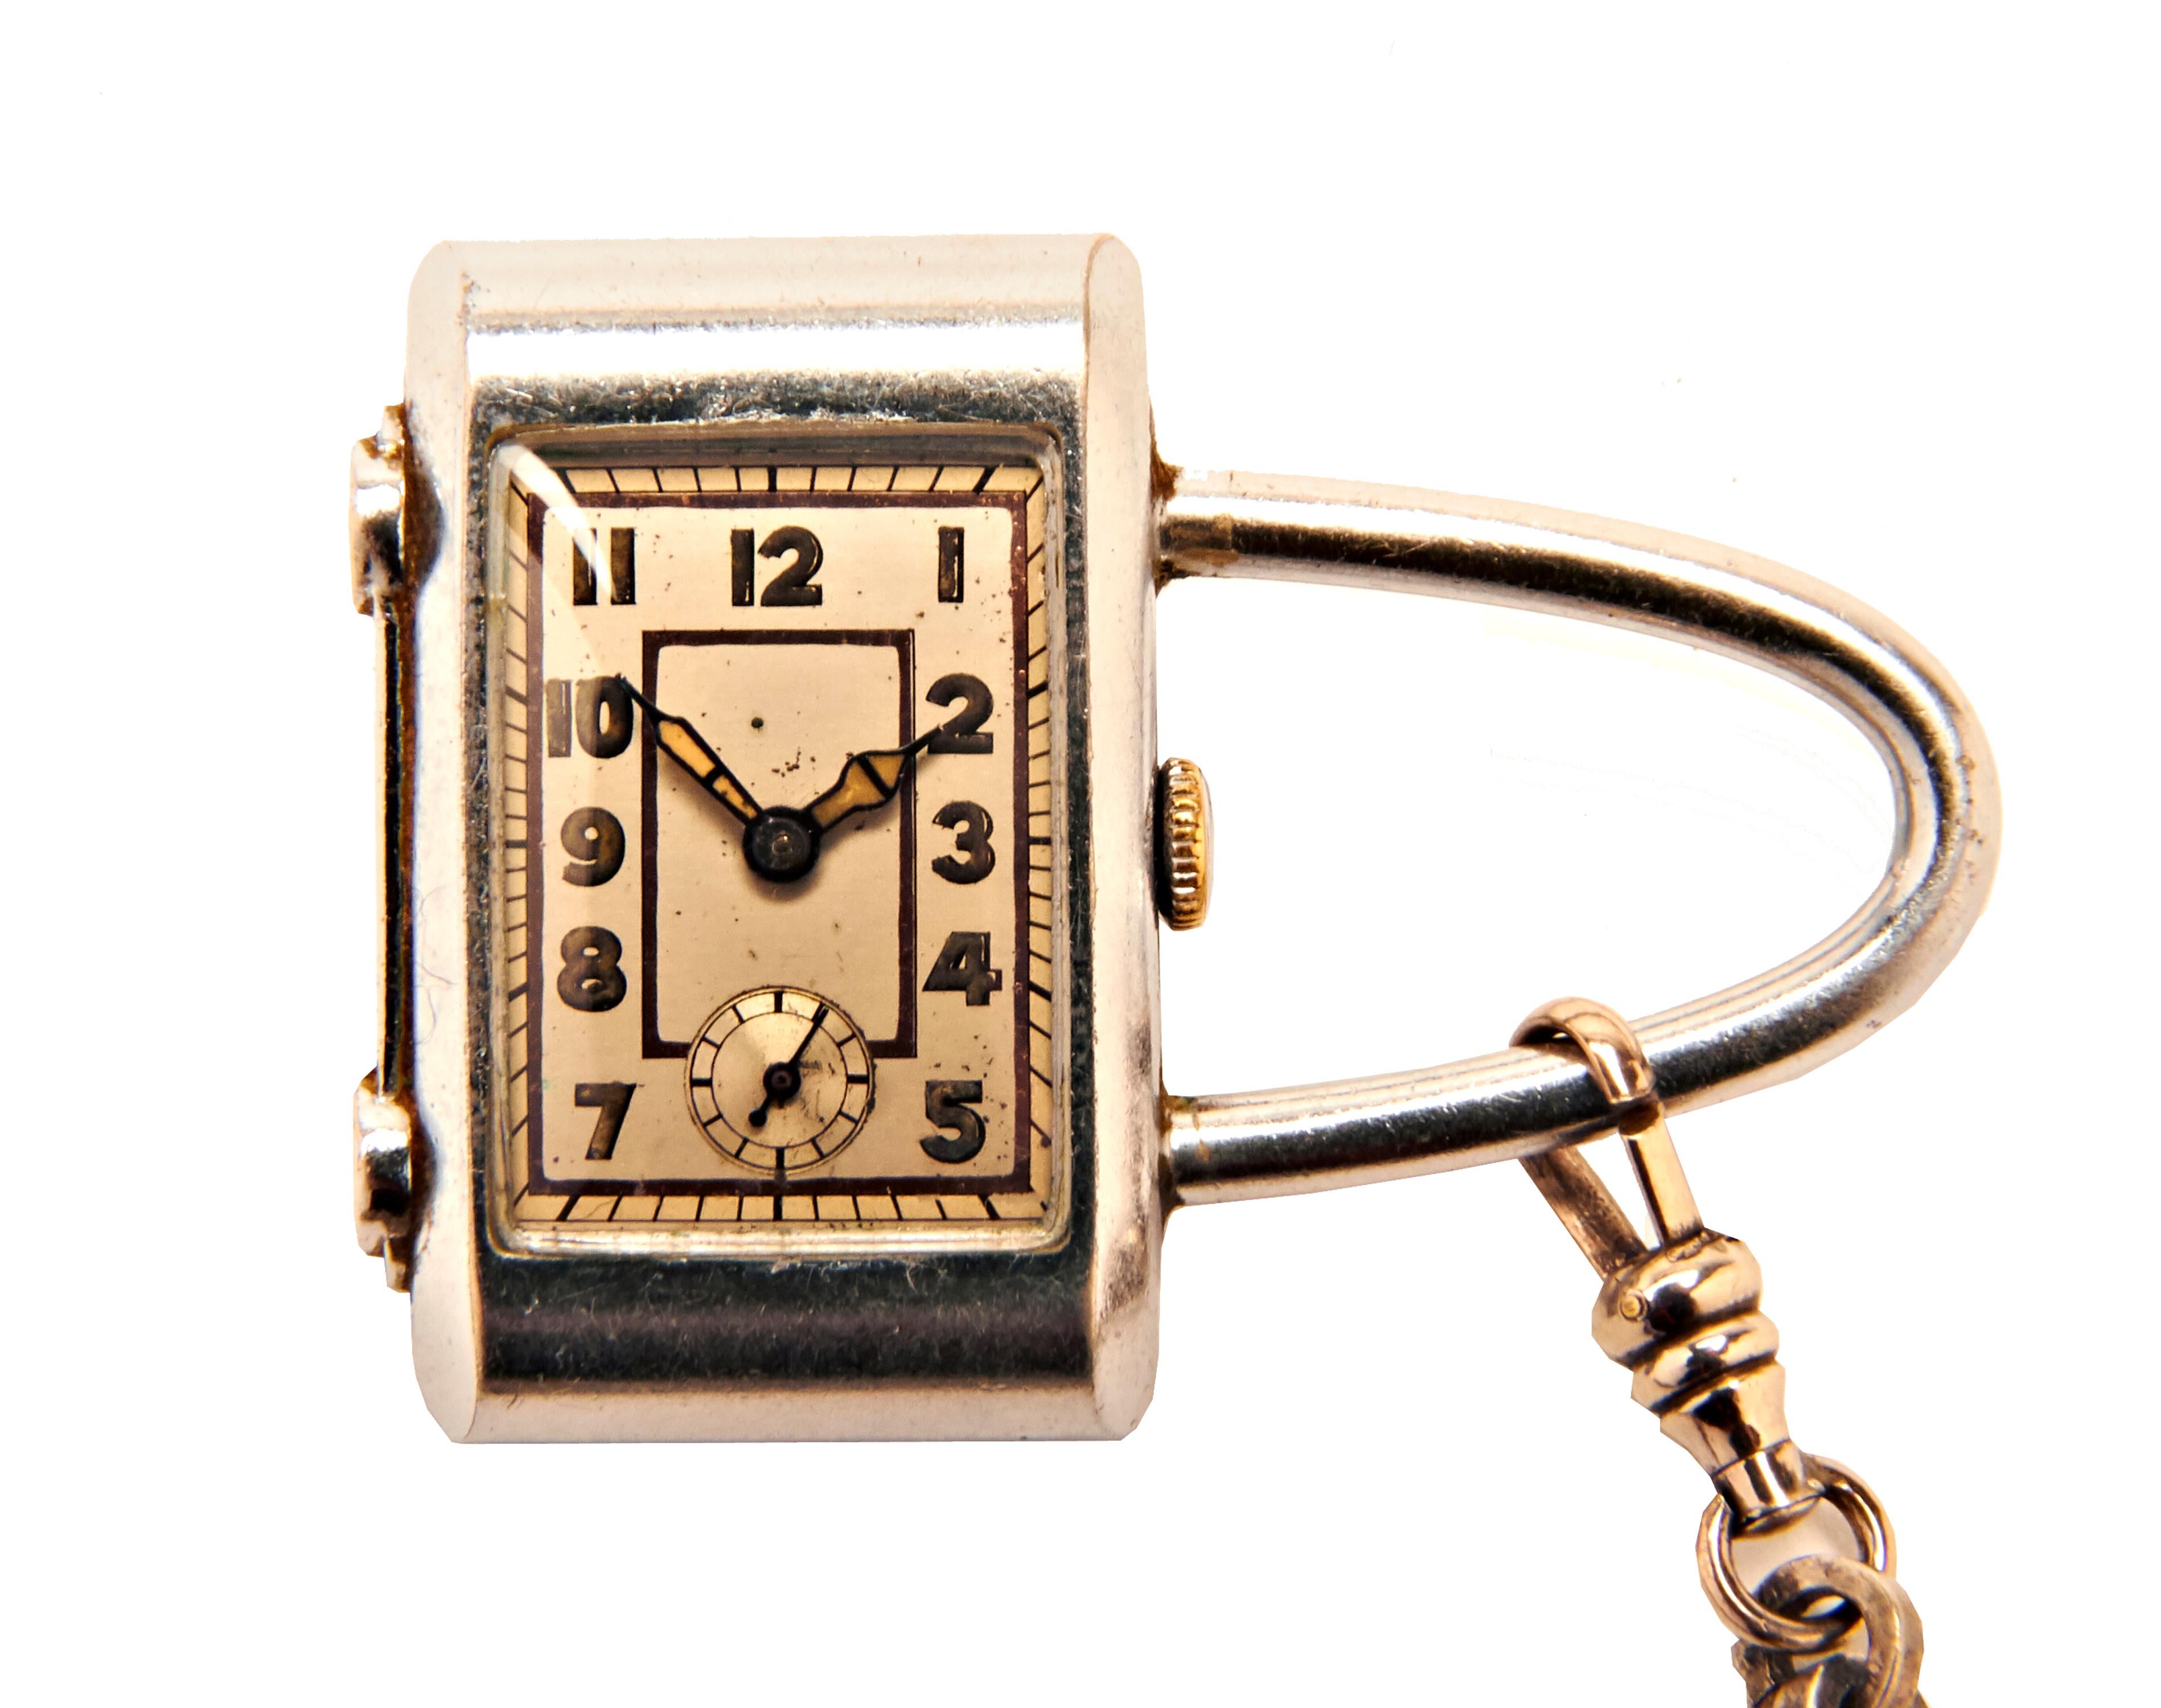 This beautifully designed Art Deco or Machine Age purse watch is executed in polished steel and is complete with its original ball and chevron articulated fob. The watch itself is padlocked shaped and features an Art Deco styled face and hands with